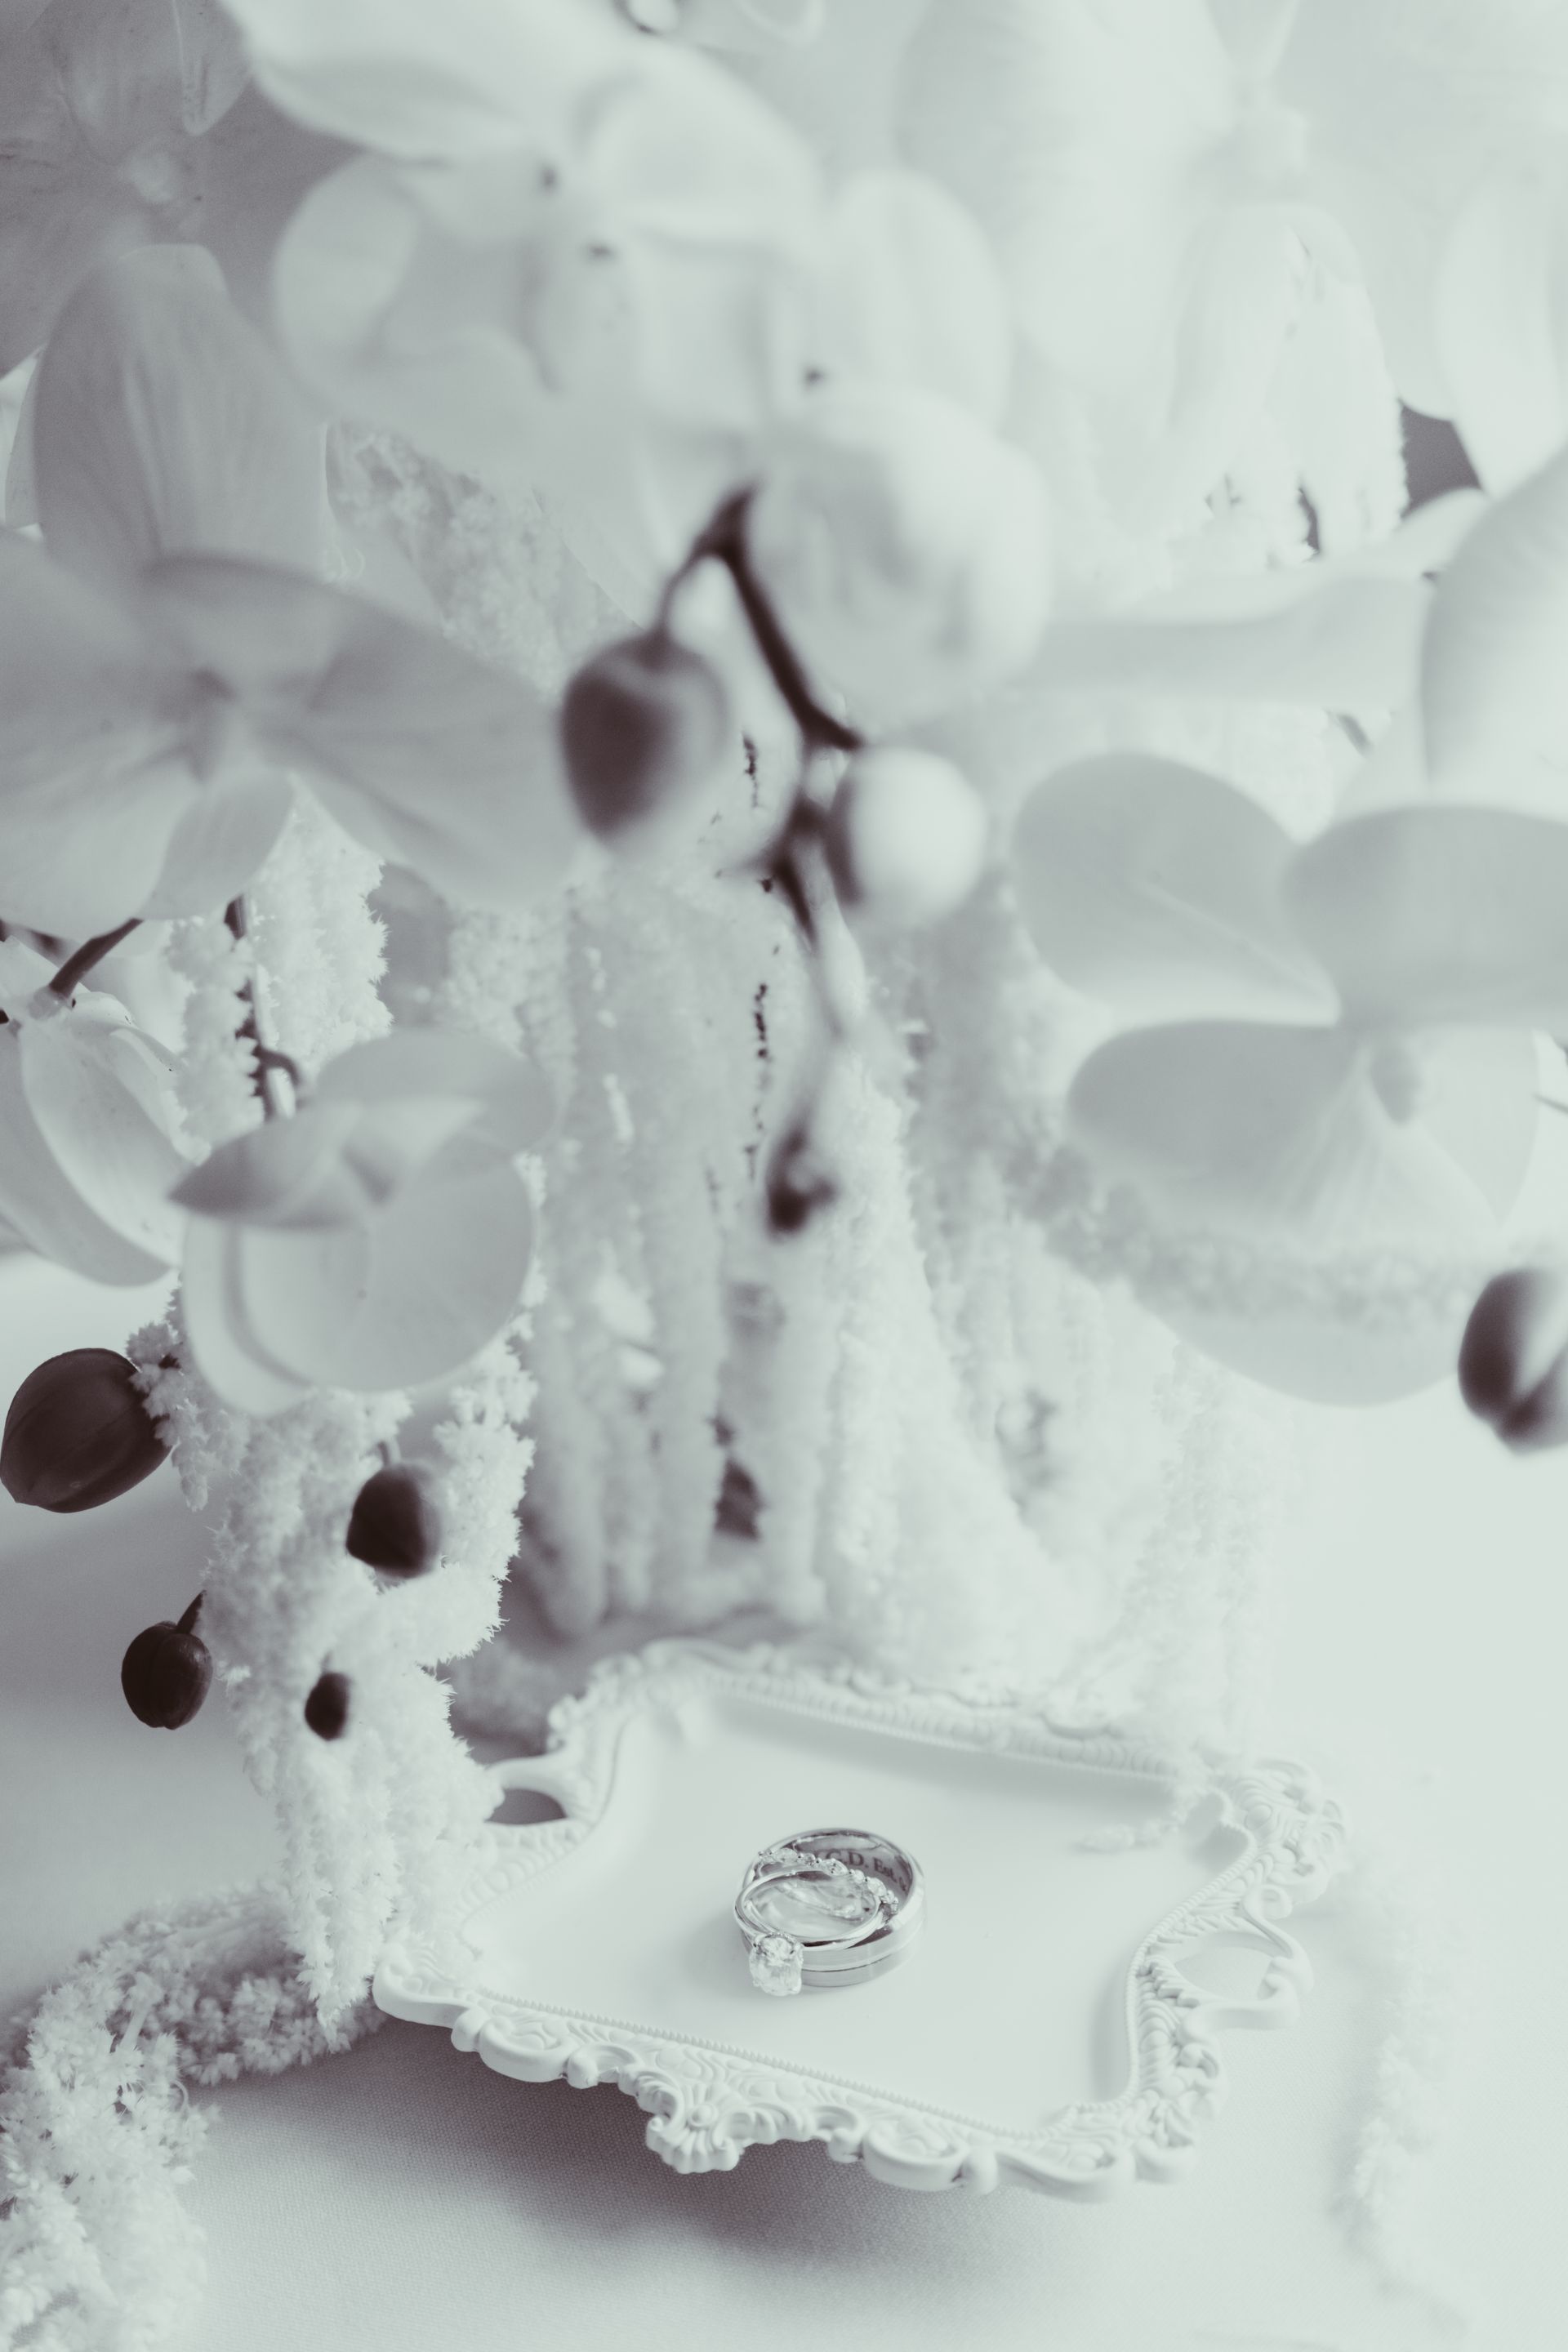 A black and white photo of a wedding ring on a pillow surrounded by flowers.